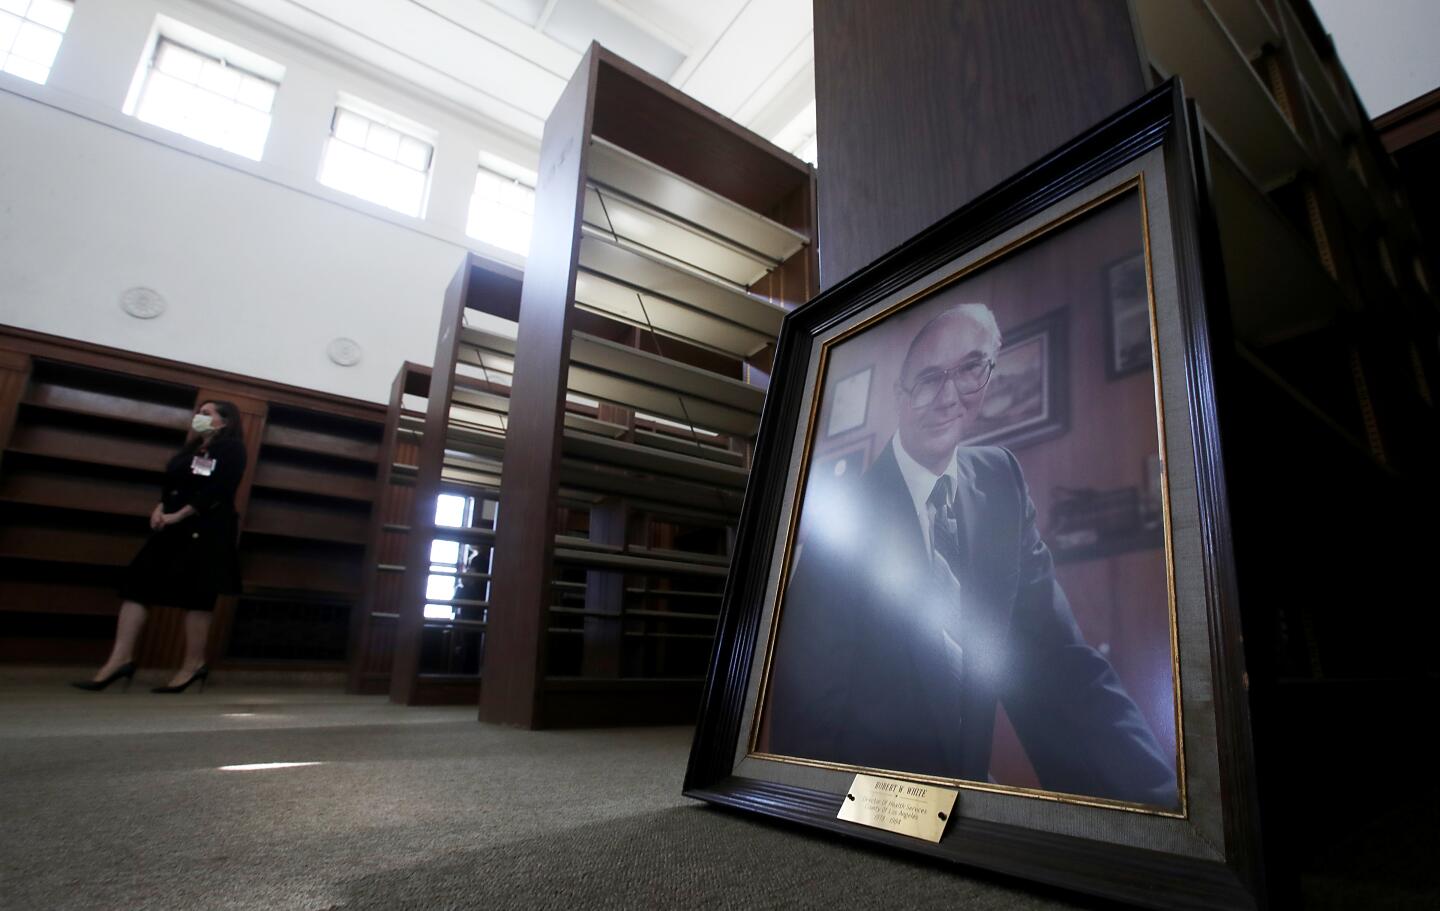 A framed portrait of former L.A. County Director of Health Services Robert W. White sits on the floor of a room.